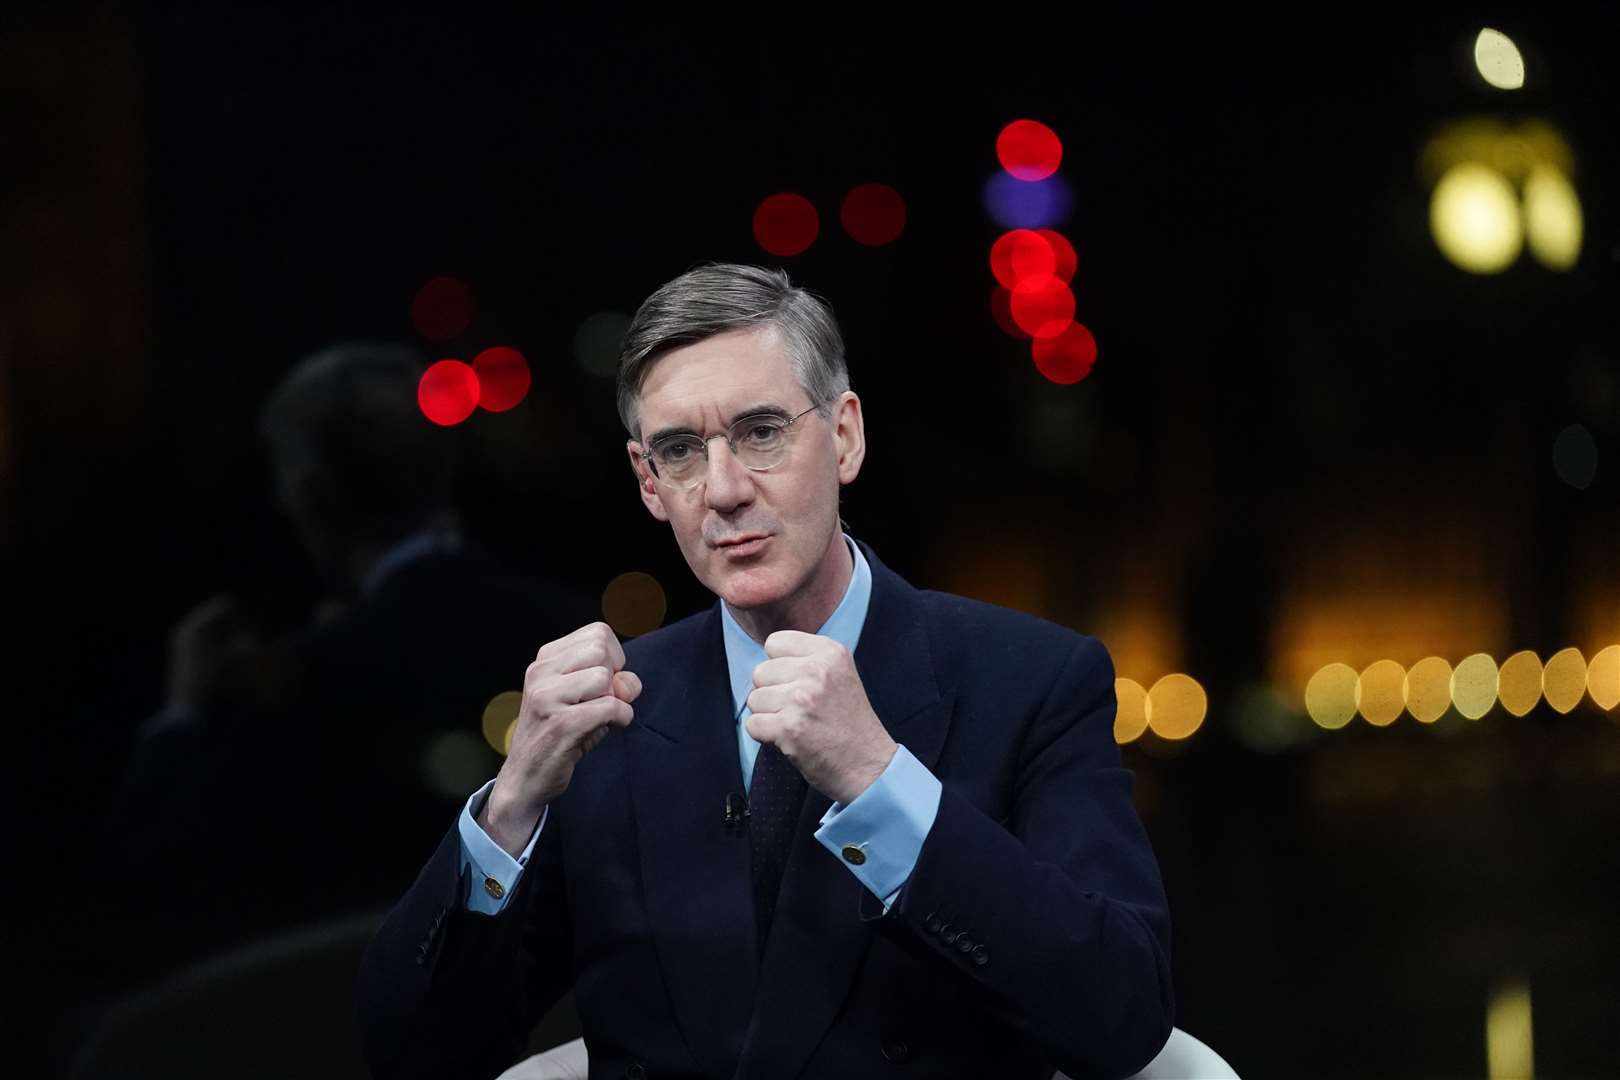 Jacob Rees-Mogg labelled Harriet Harman’s position absurd and said the process was worse than a kangaroo court (Stefan Rousseau/PA)